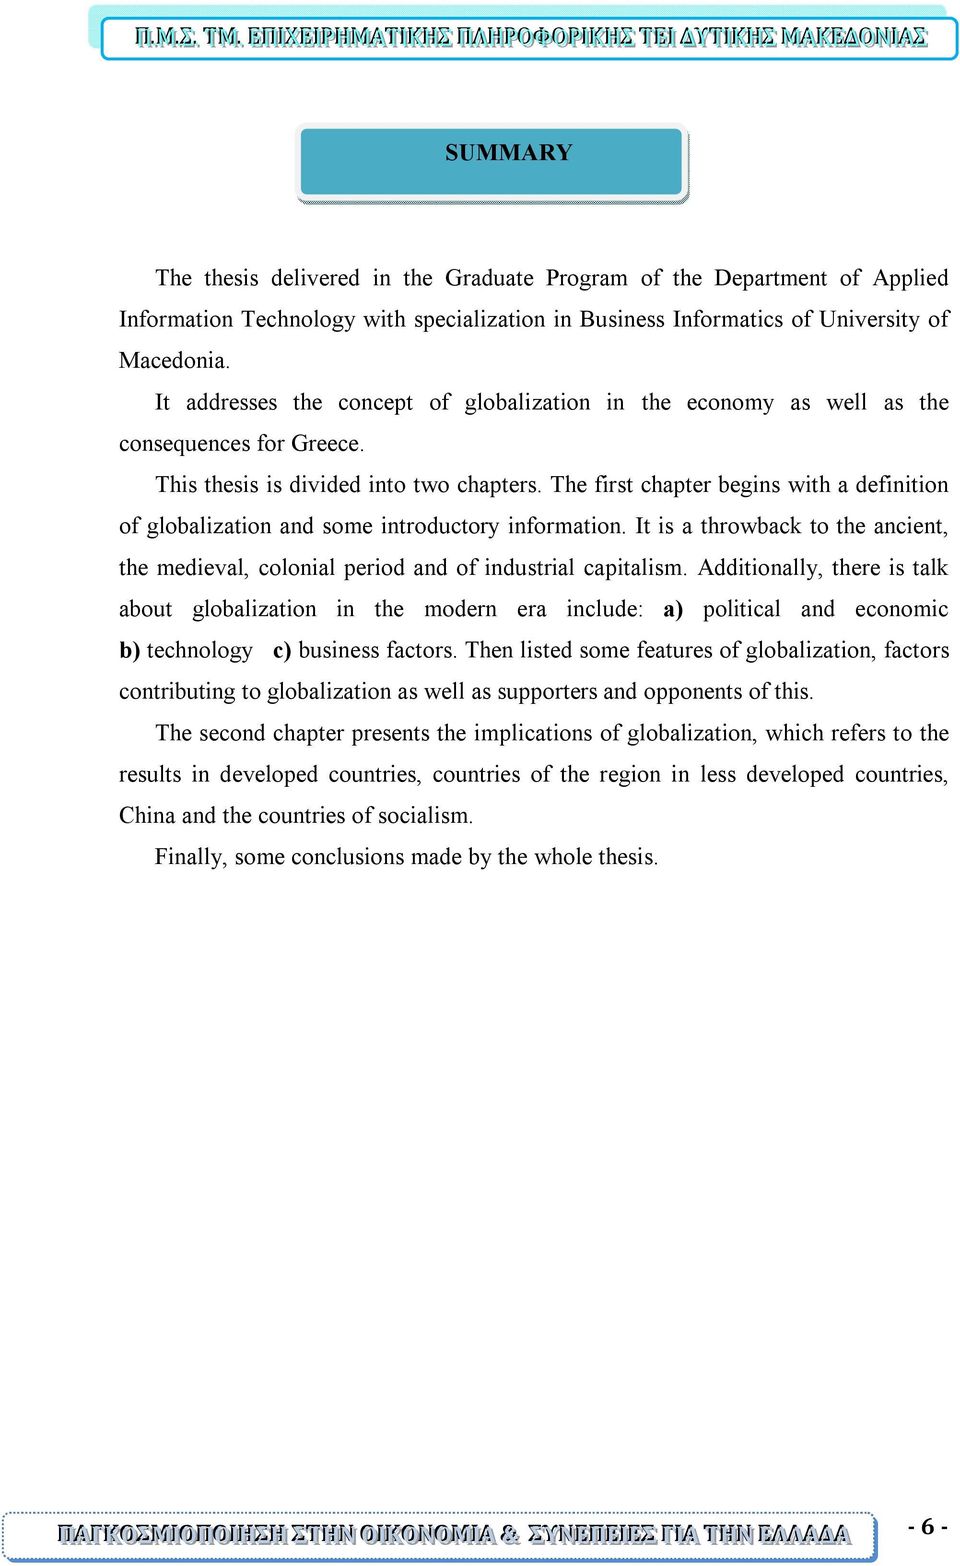 The first chapter begins with a definition of globalization and some introductory information. It is a throwback to the ancient, the medieval, colonial period and of industrial capitalism.